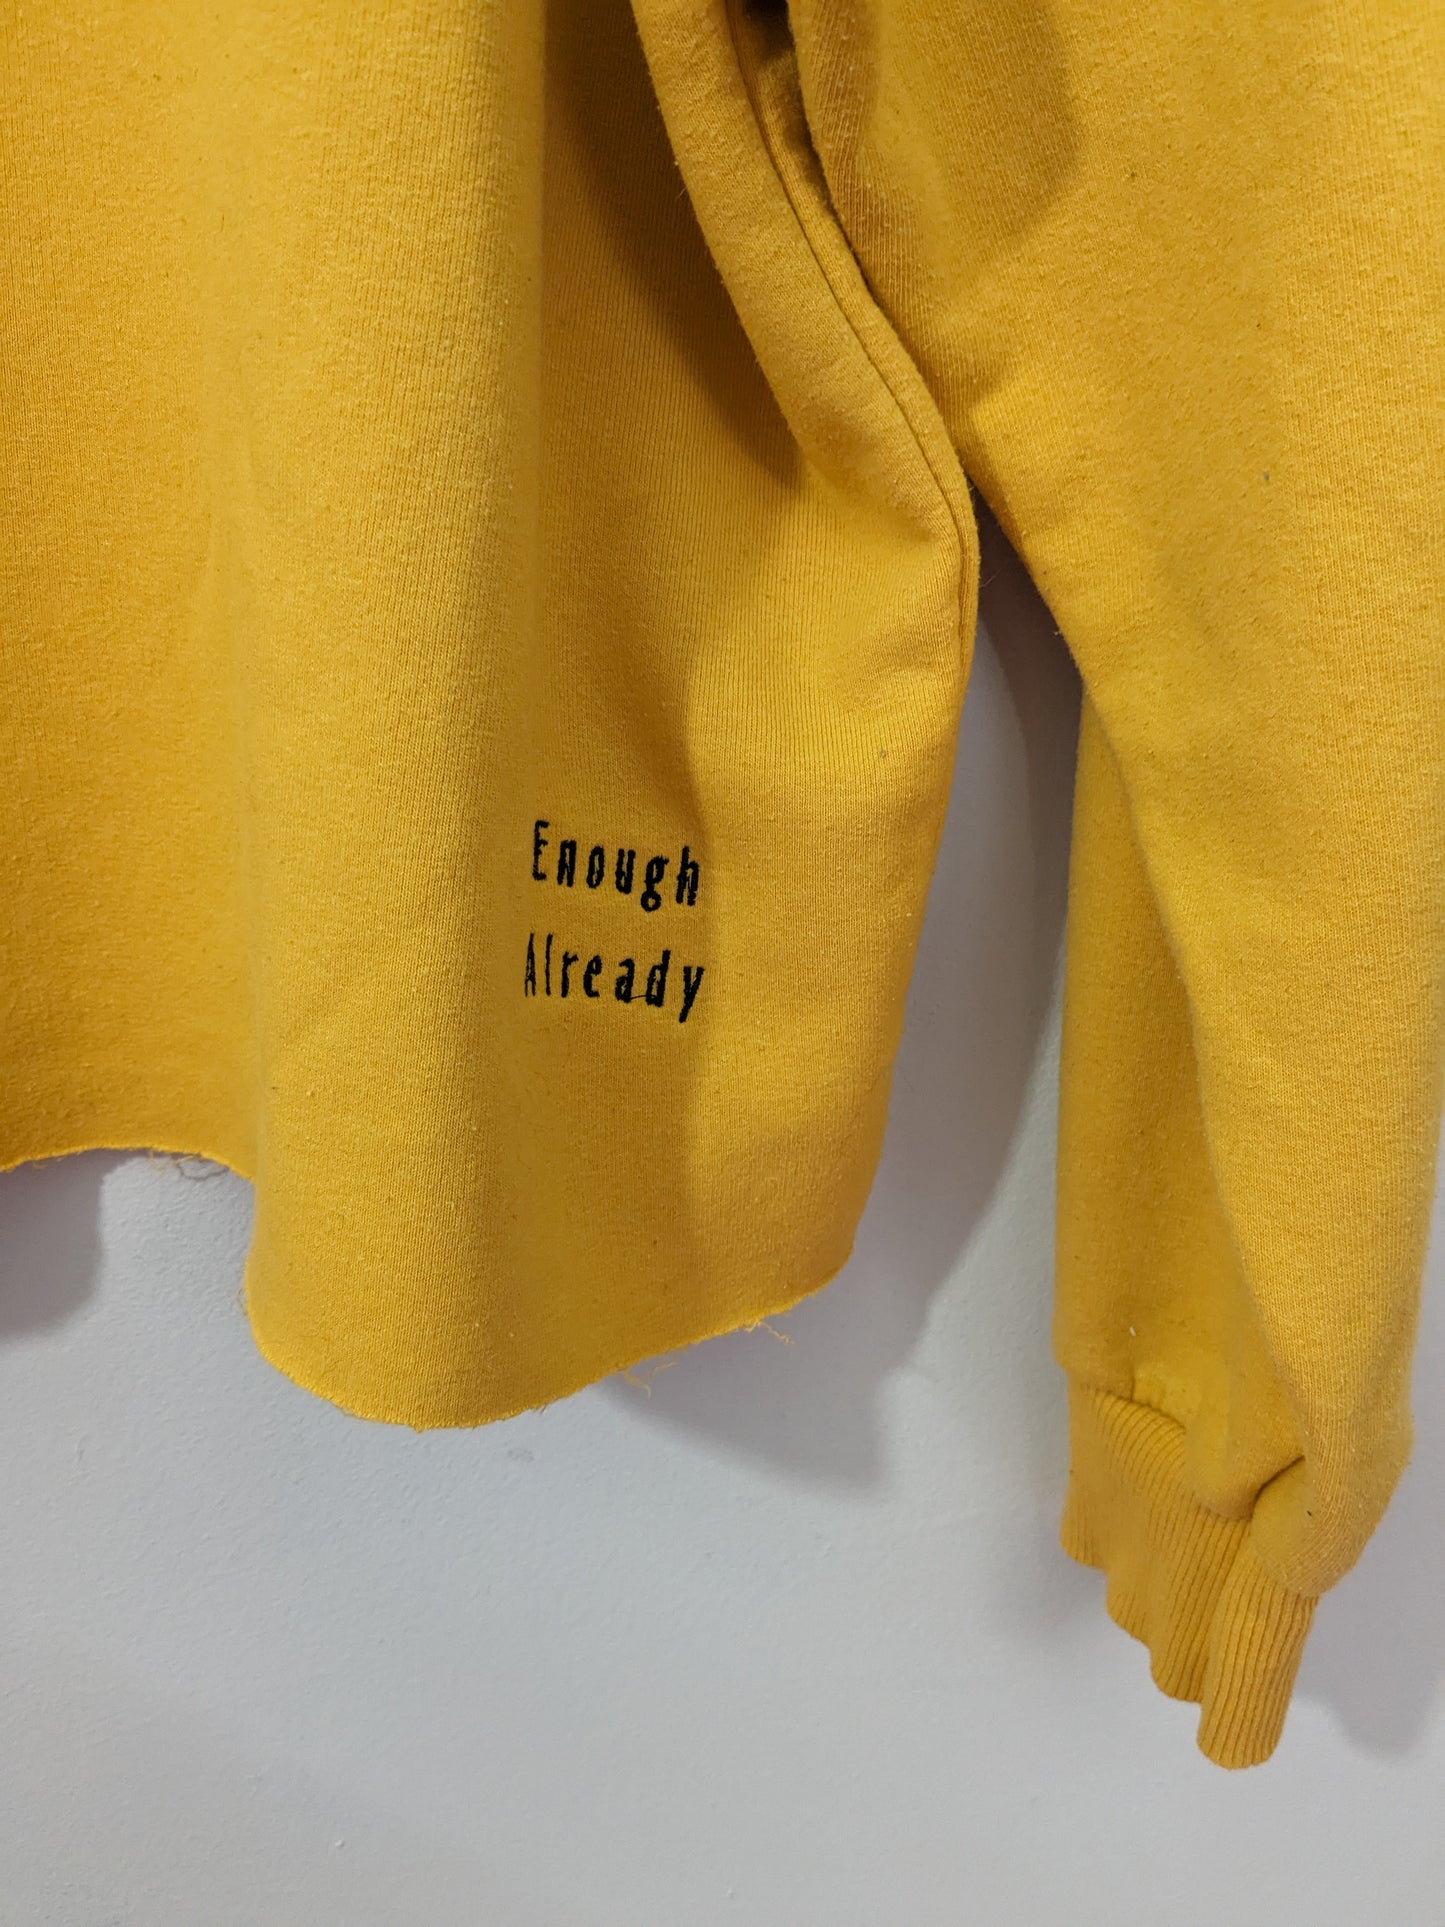 Size 20 Reworked Mustard Sweatshirt with Embroidered Jiggery Pokery Quirky Design